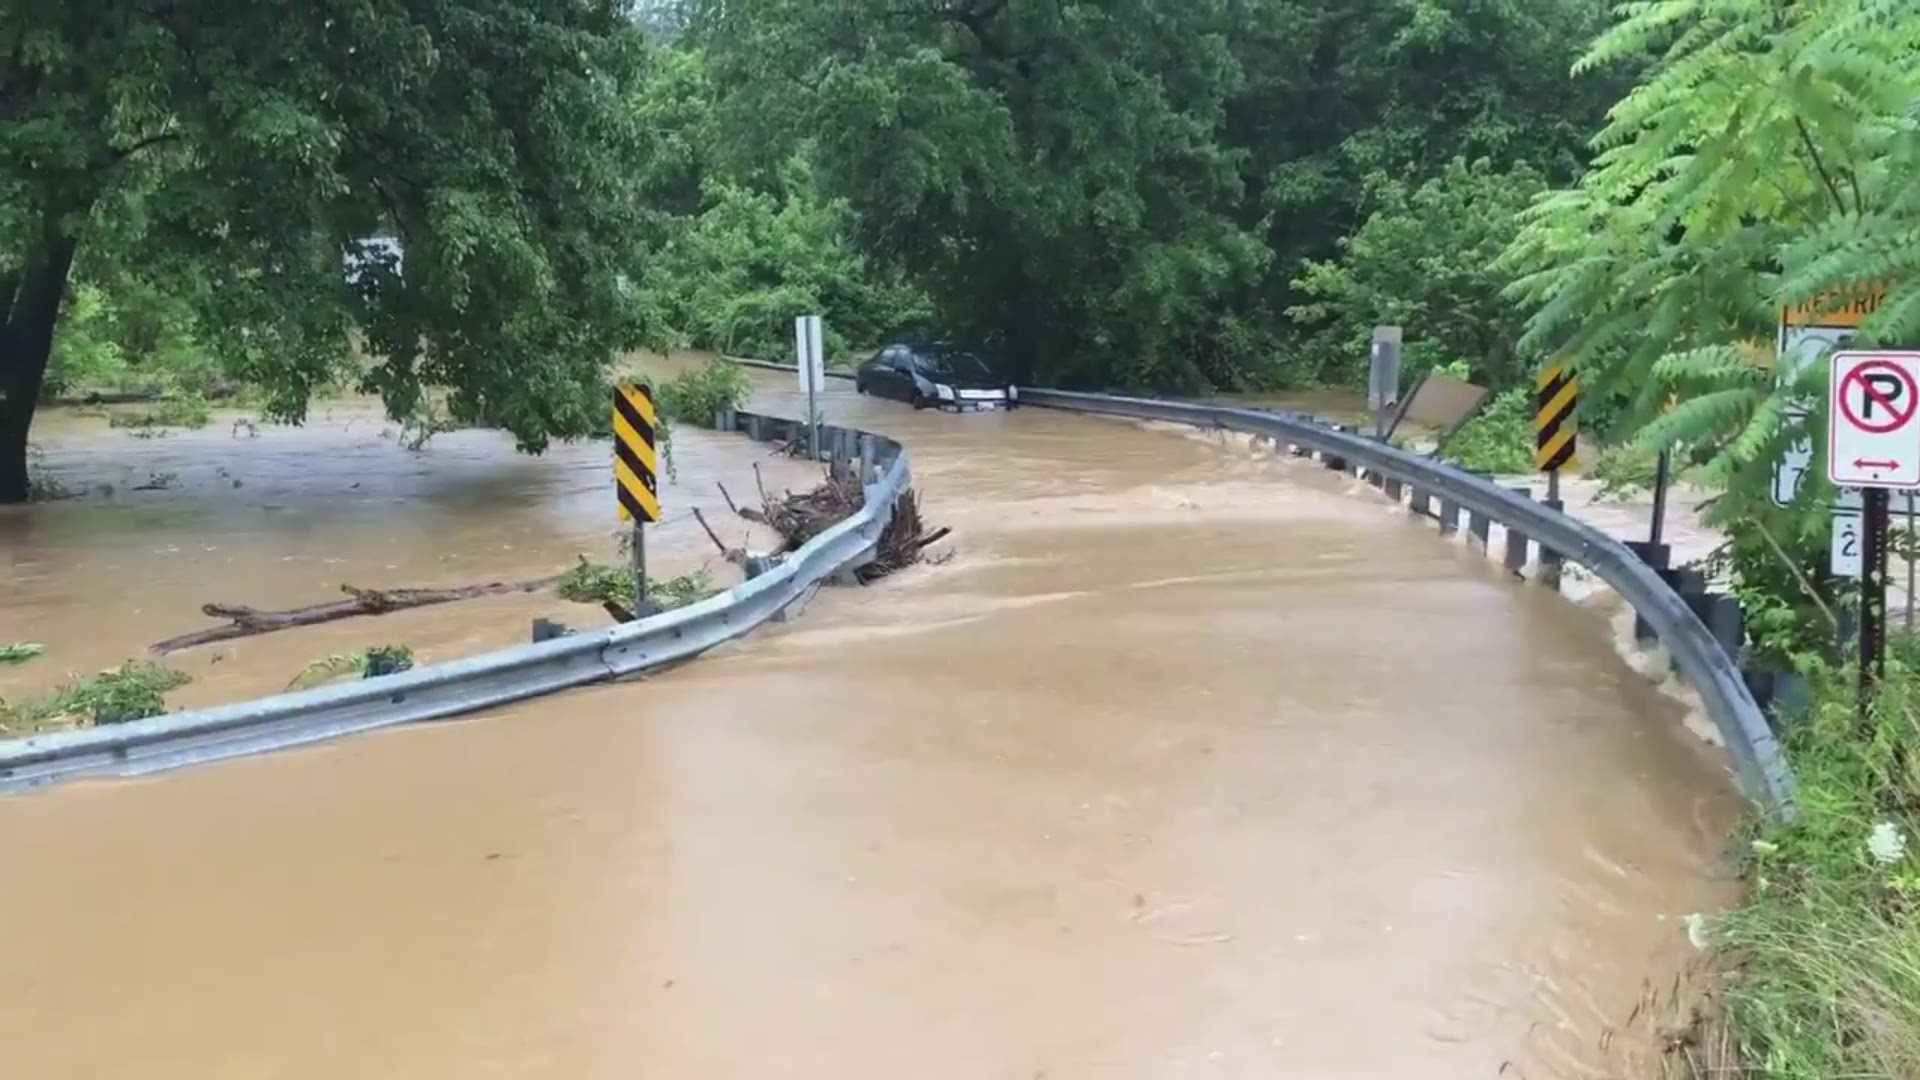 Flooding was reported on several roads throughout the D.C. area. This is from a road in Clarksburg, Md. in Montgomery County.